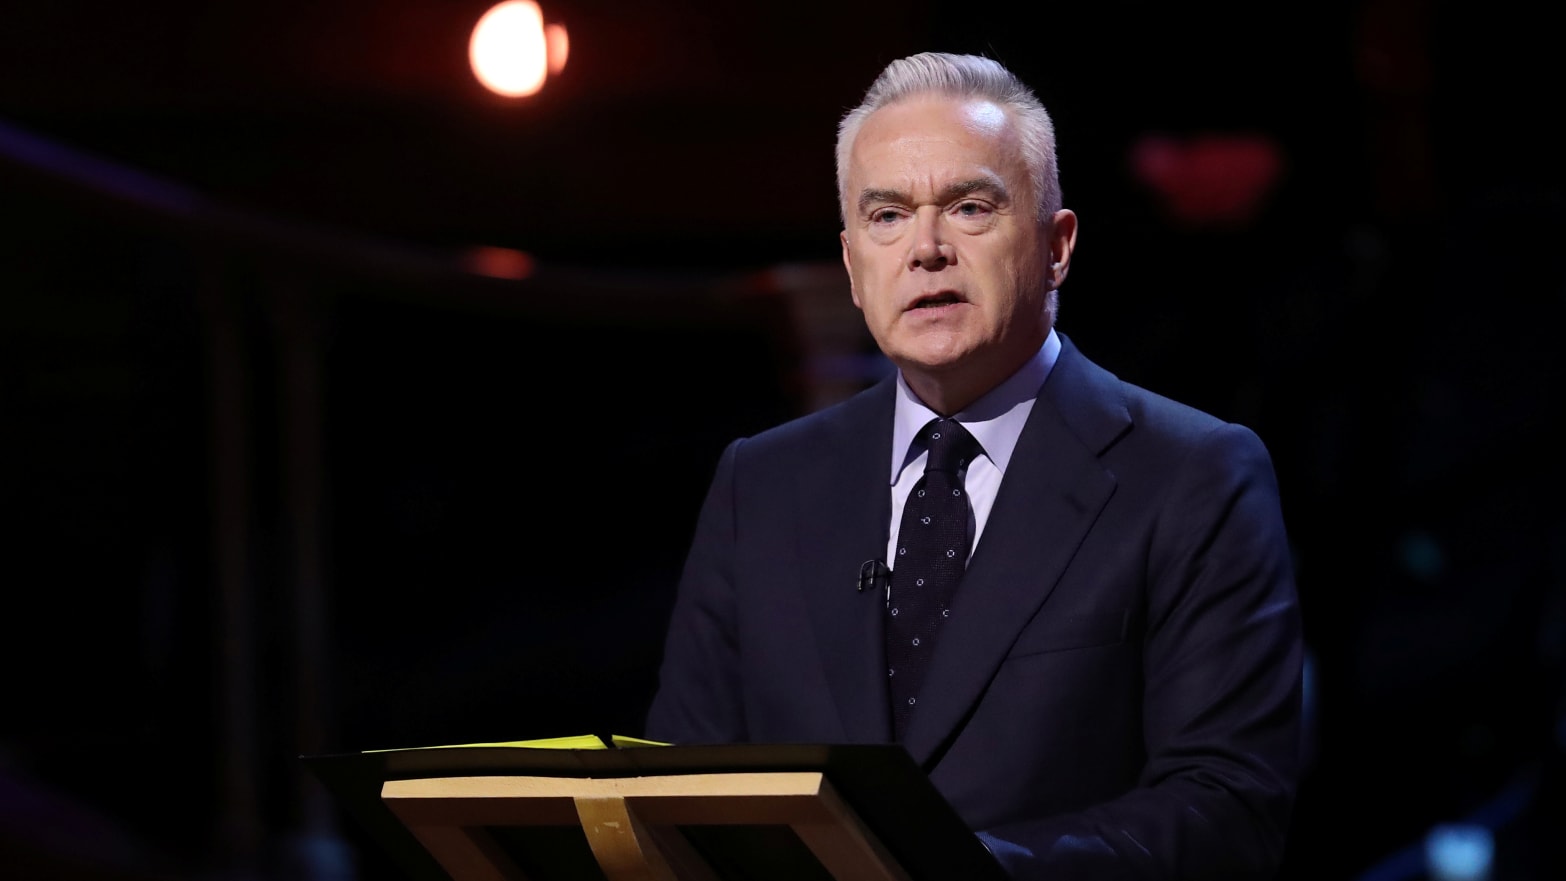 Huw Edwards has been outed as the BBC star in an alleged teen sex pic scandal.